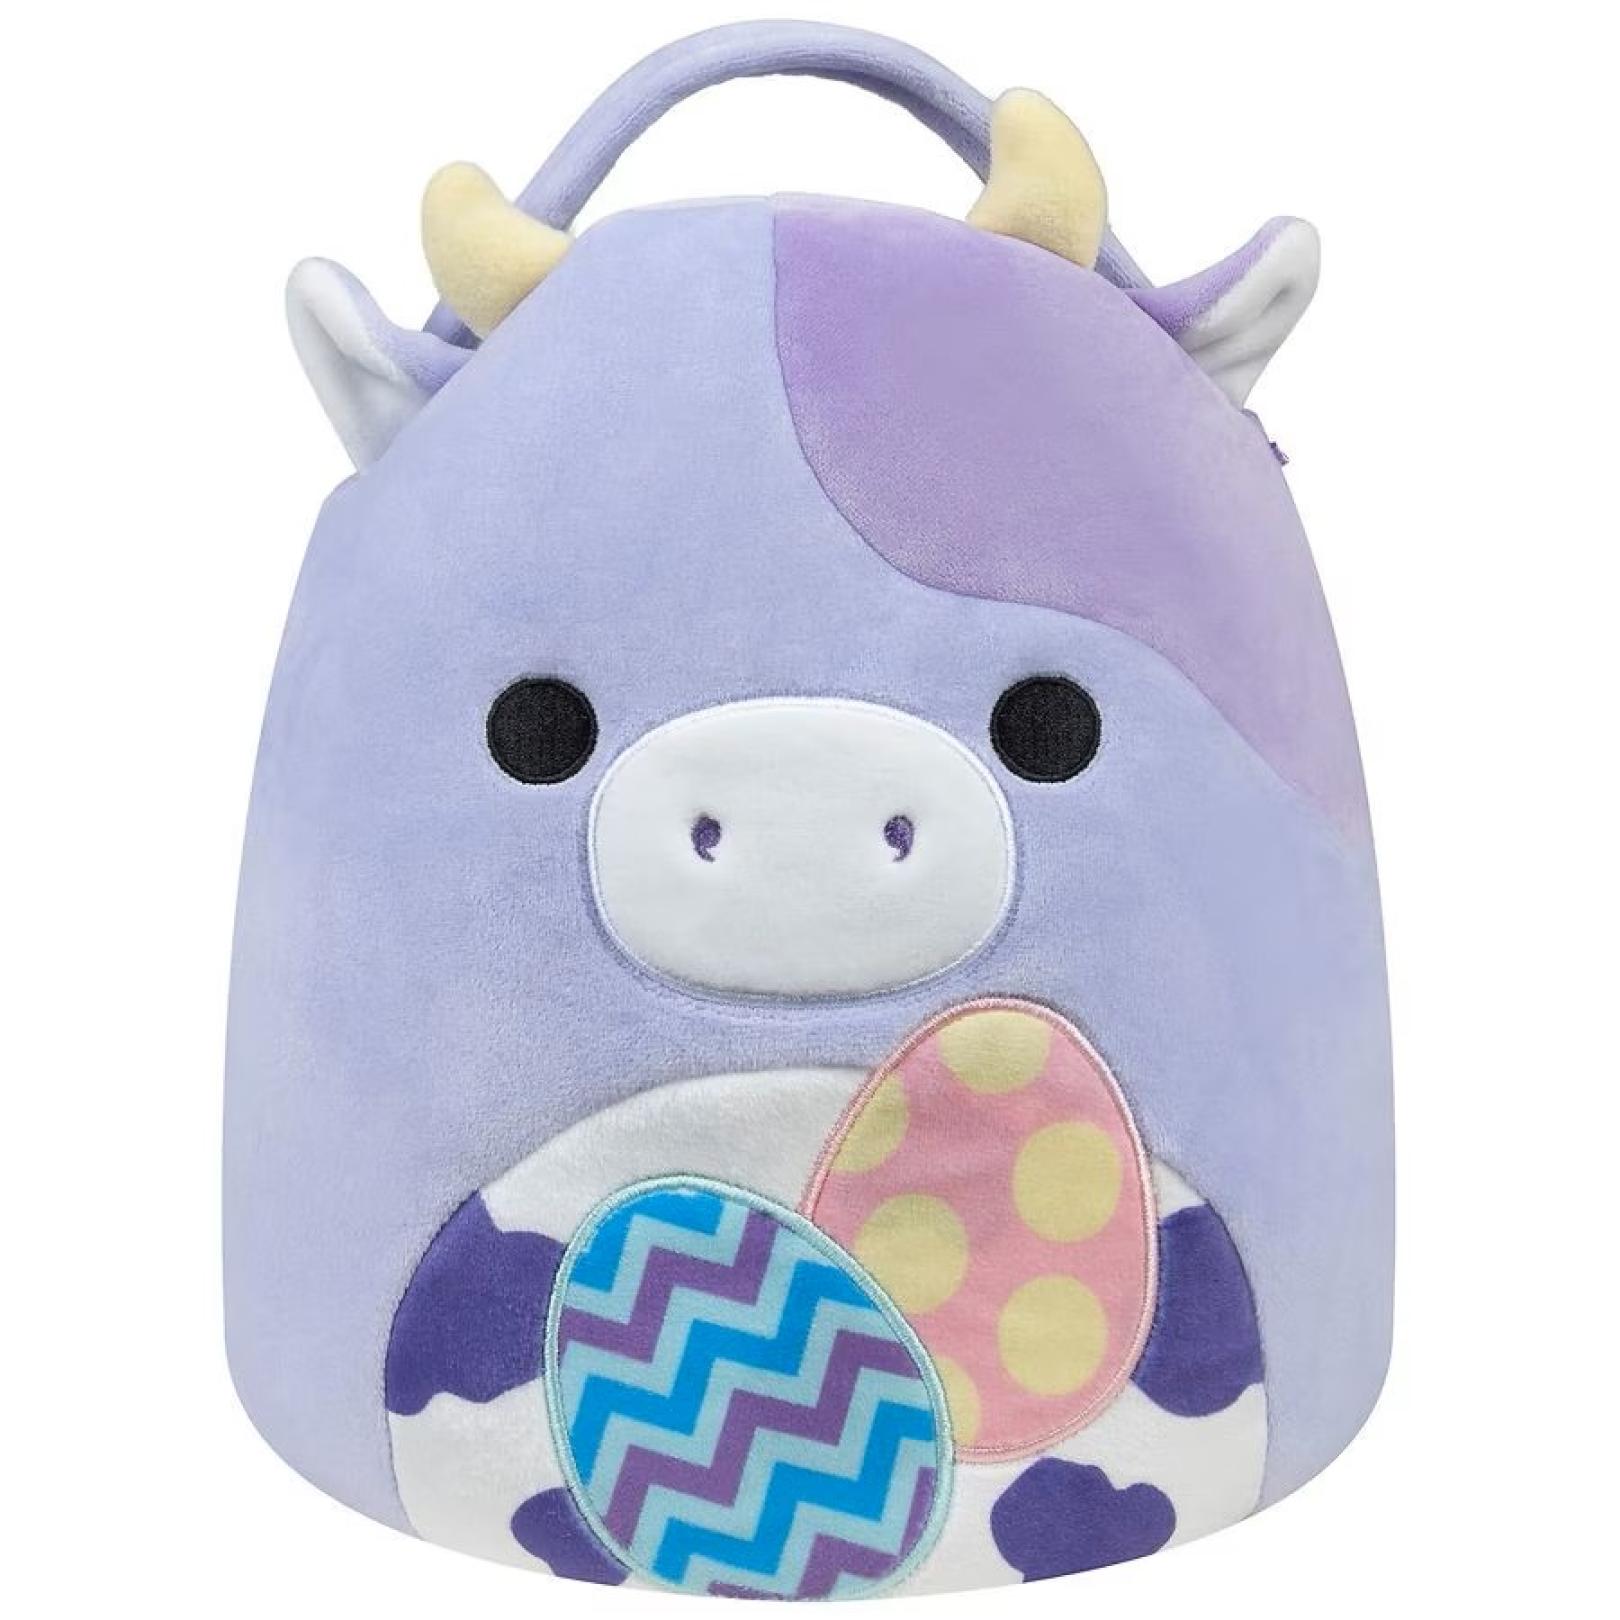 Squishmallows Easter basket purple cow